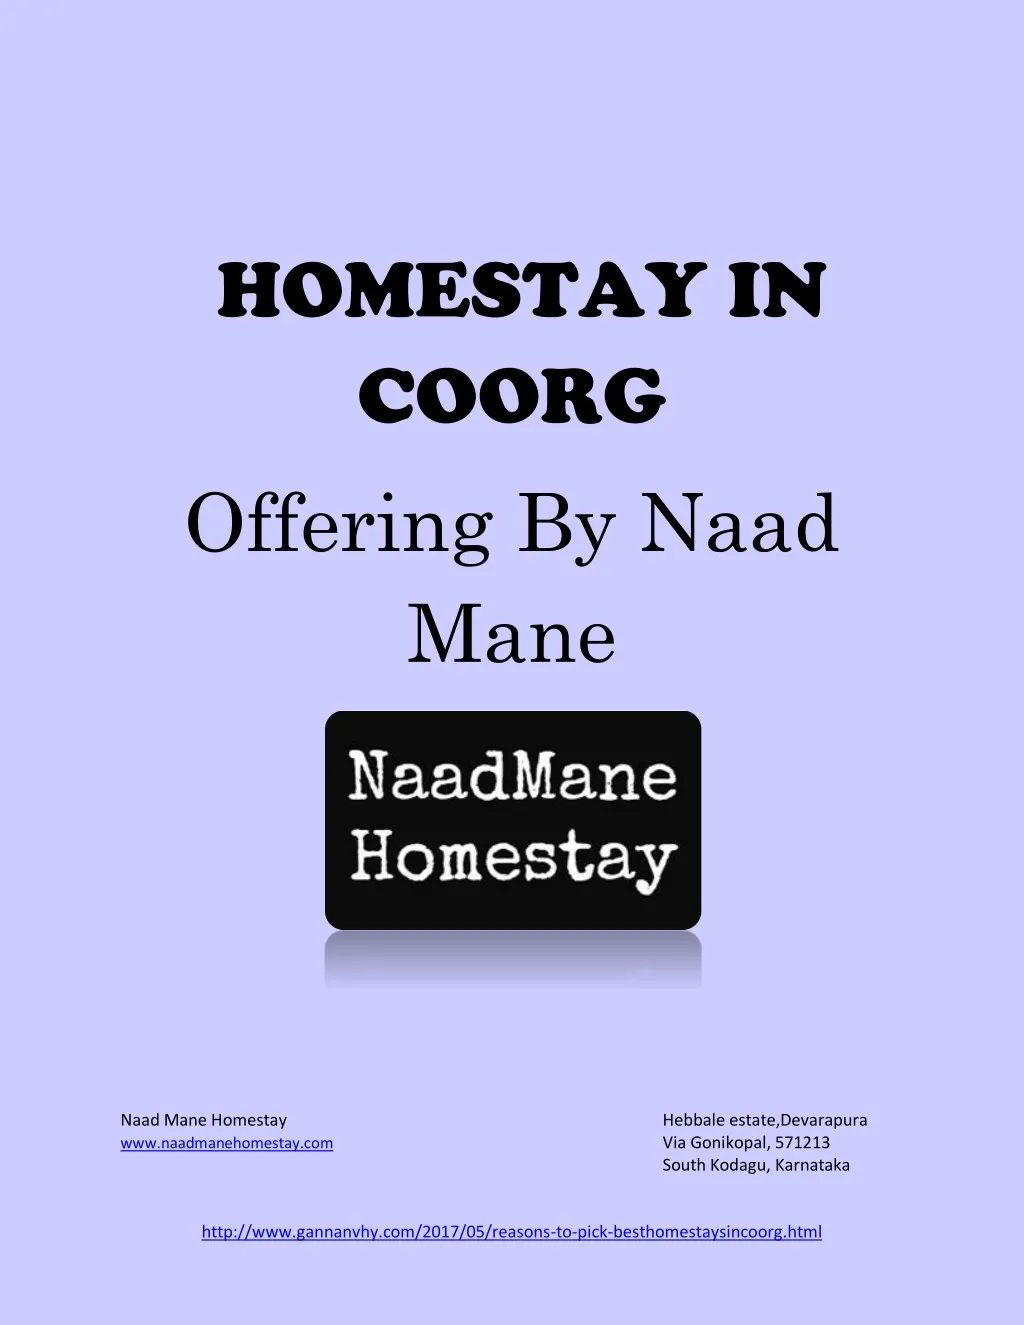 homestay in coorg offering by naad mane